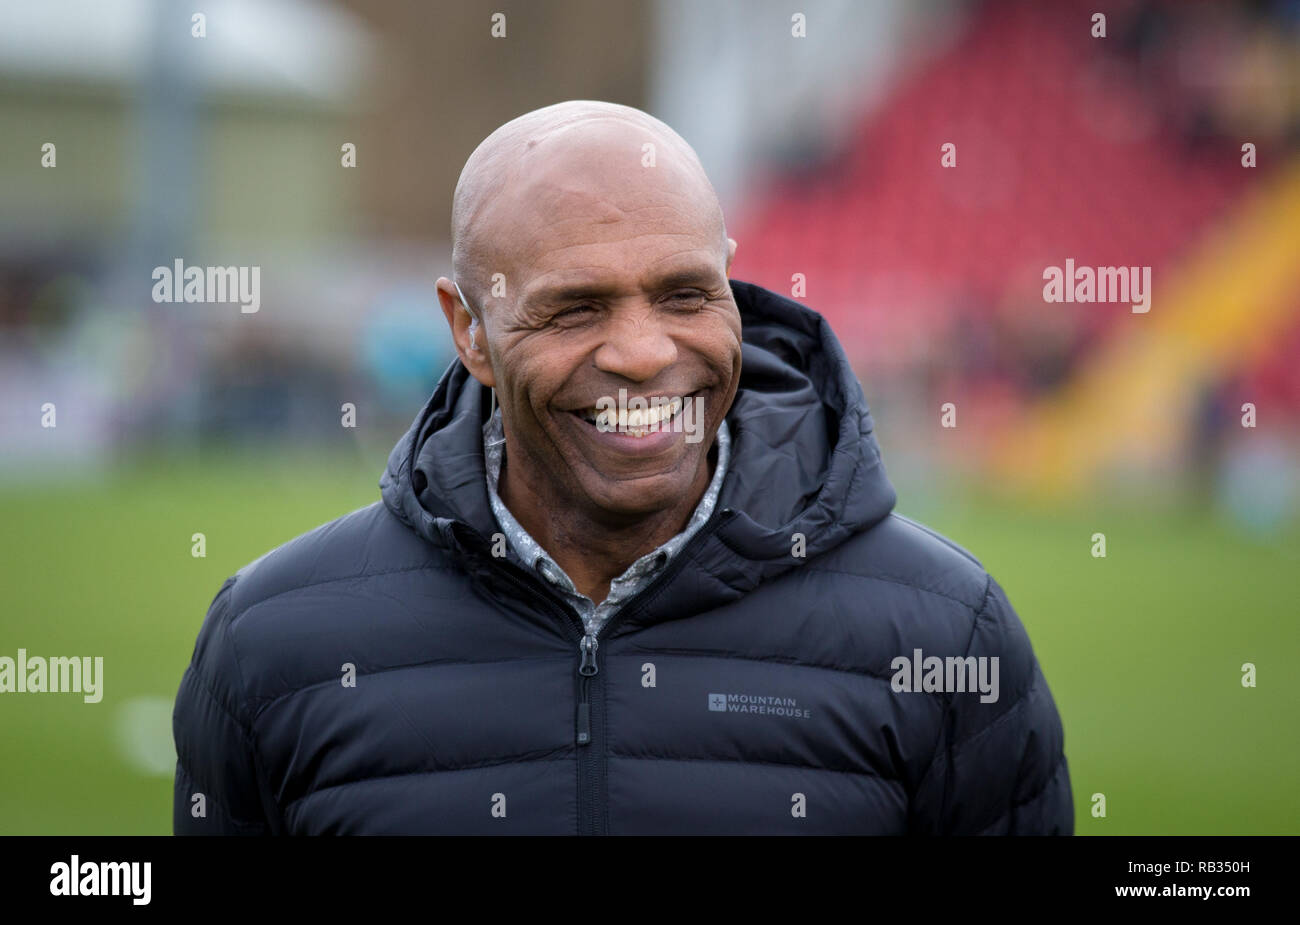 Woking, UK. 06th Jan, 2019. Former Watford FC player Luther Blissett ahead of the FA Cup 3rd round match between Woking and Watford at the Kingfield Stadium, Woking, England on 6 January 2019. Photo by Andy Rowland. . (Photograph May Only Be Used For Newspaper And/Or Magazine Editorial Purposes. www.football-dataco.com) Credit: Andrew Rowland/Alamy Live News Stock Photo